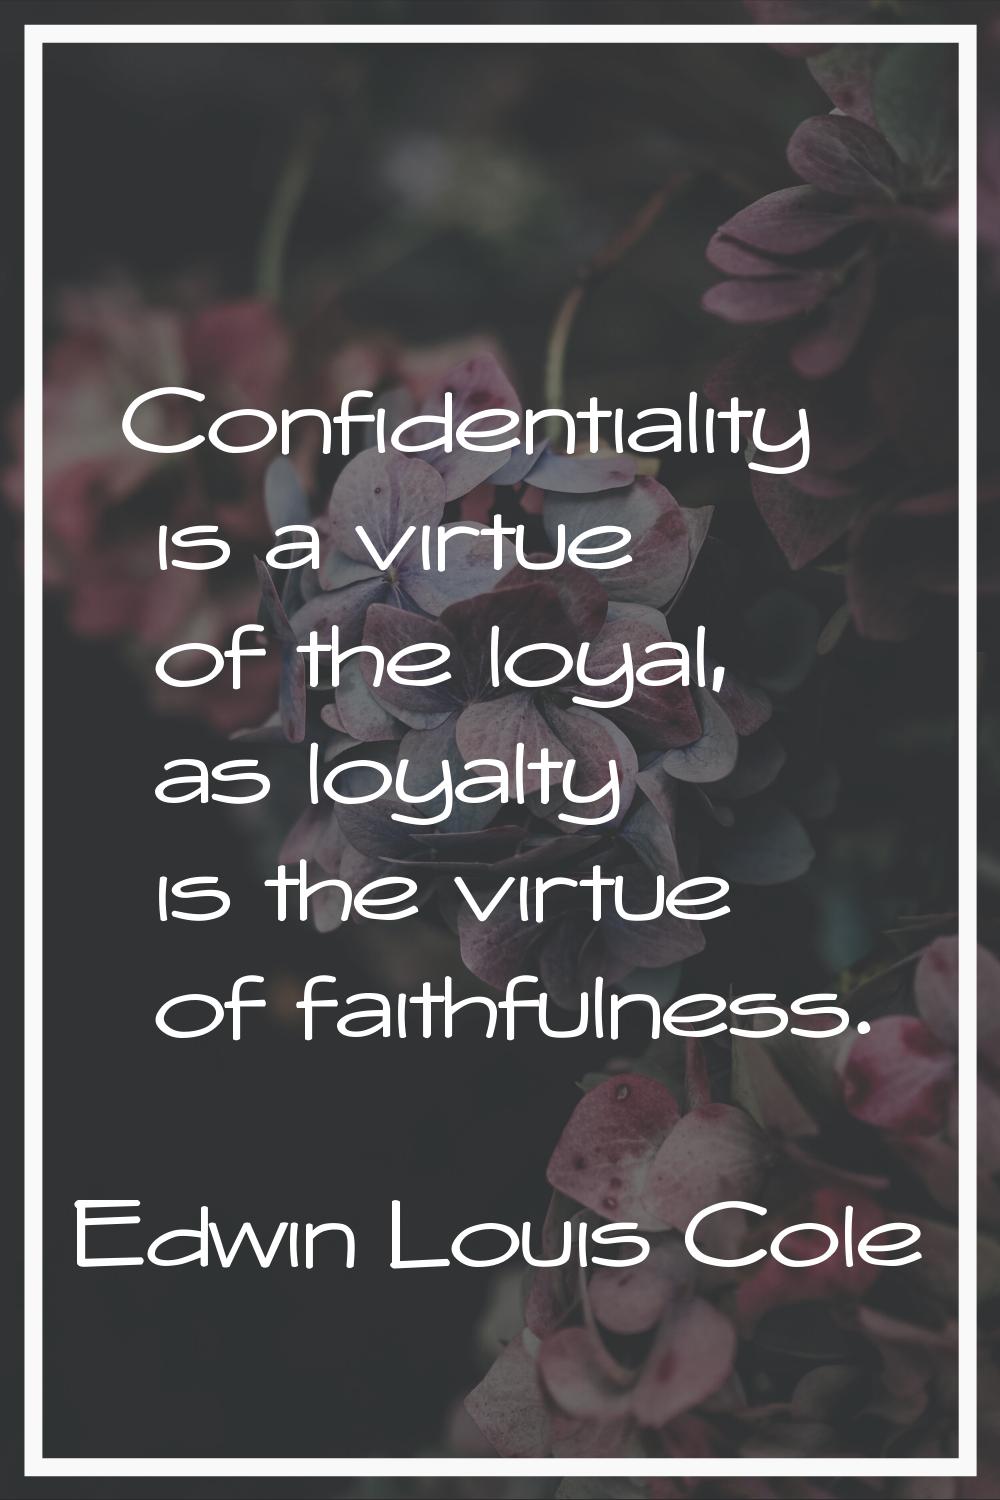 Confidentiality is a virtue of the loyal, as loyalty is the virtue of faithfulness.